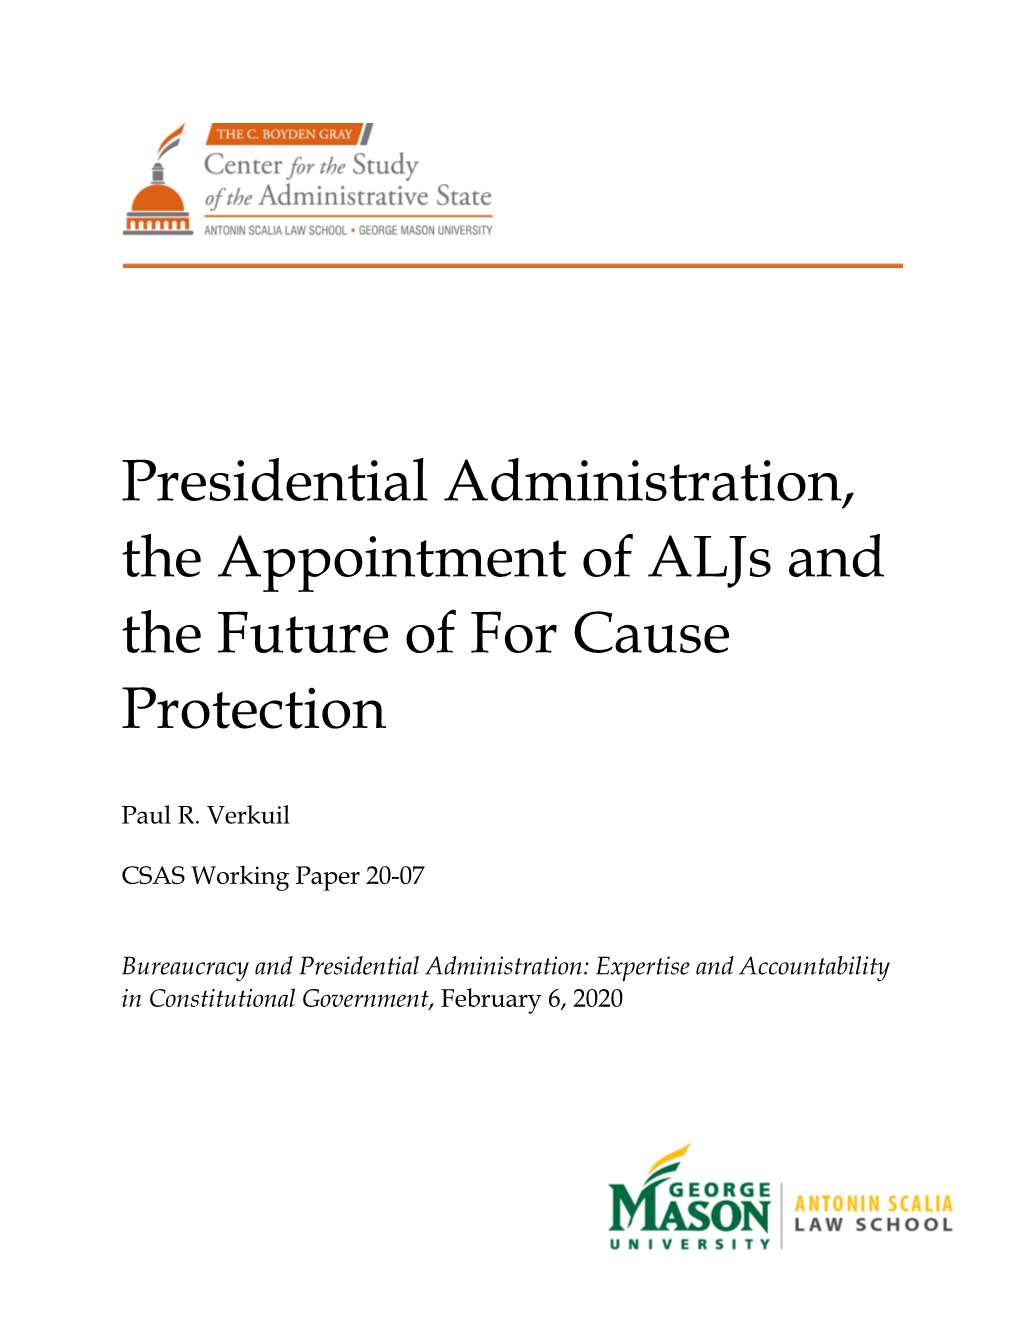 Presidential Administration, the Appointment of Aljs and the Future of for Cause Protection